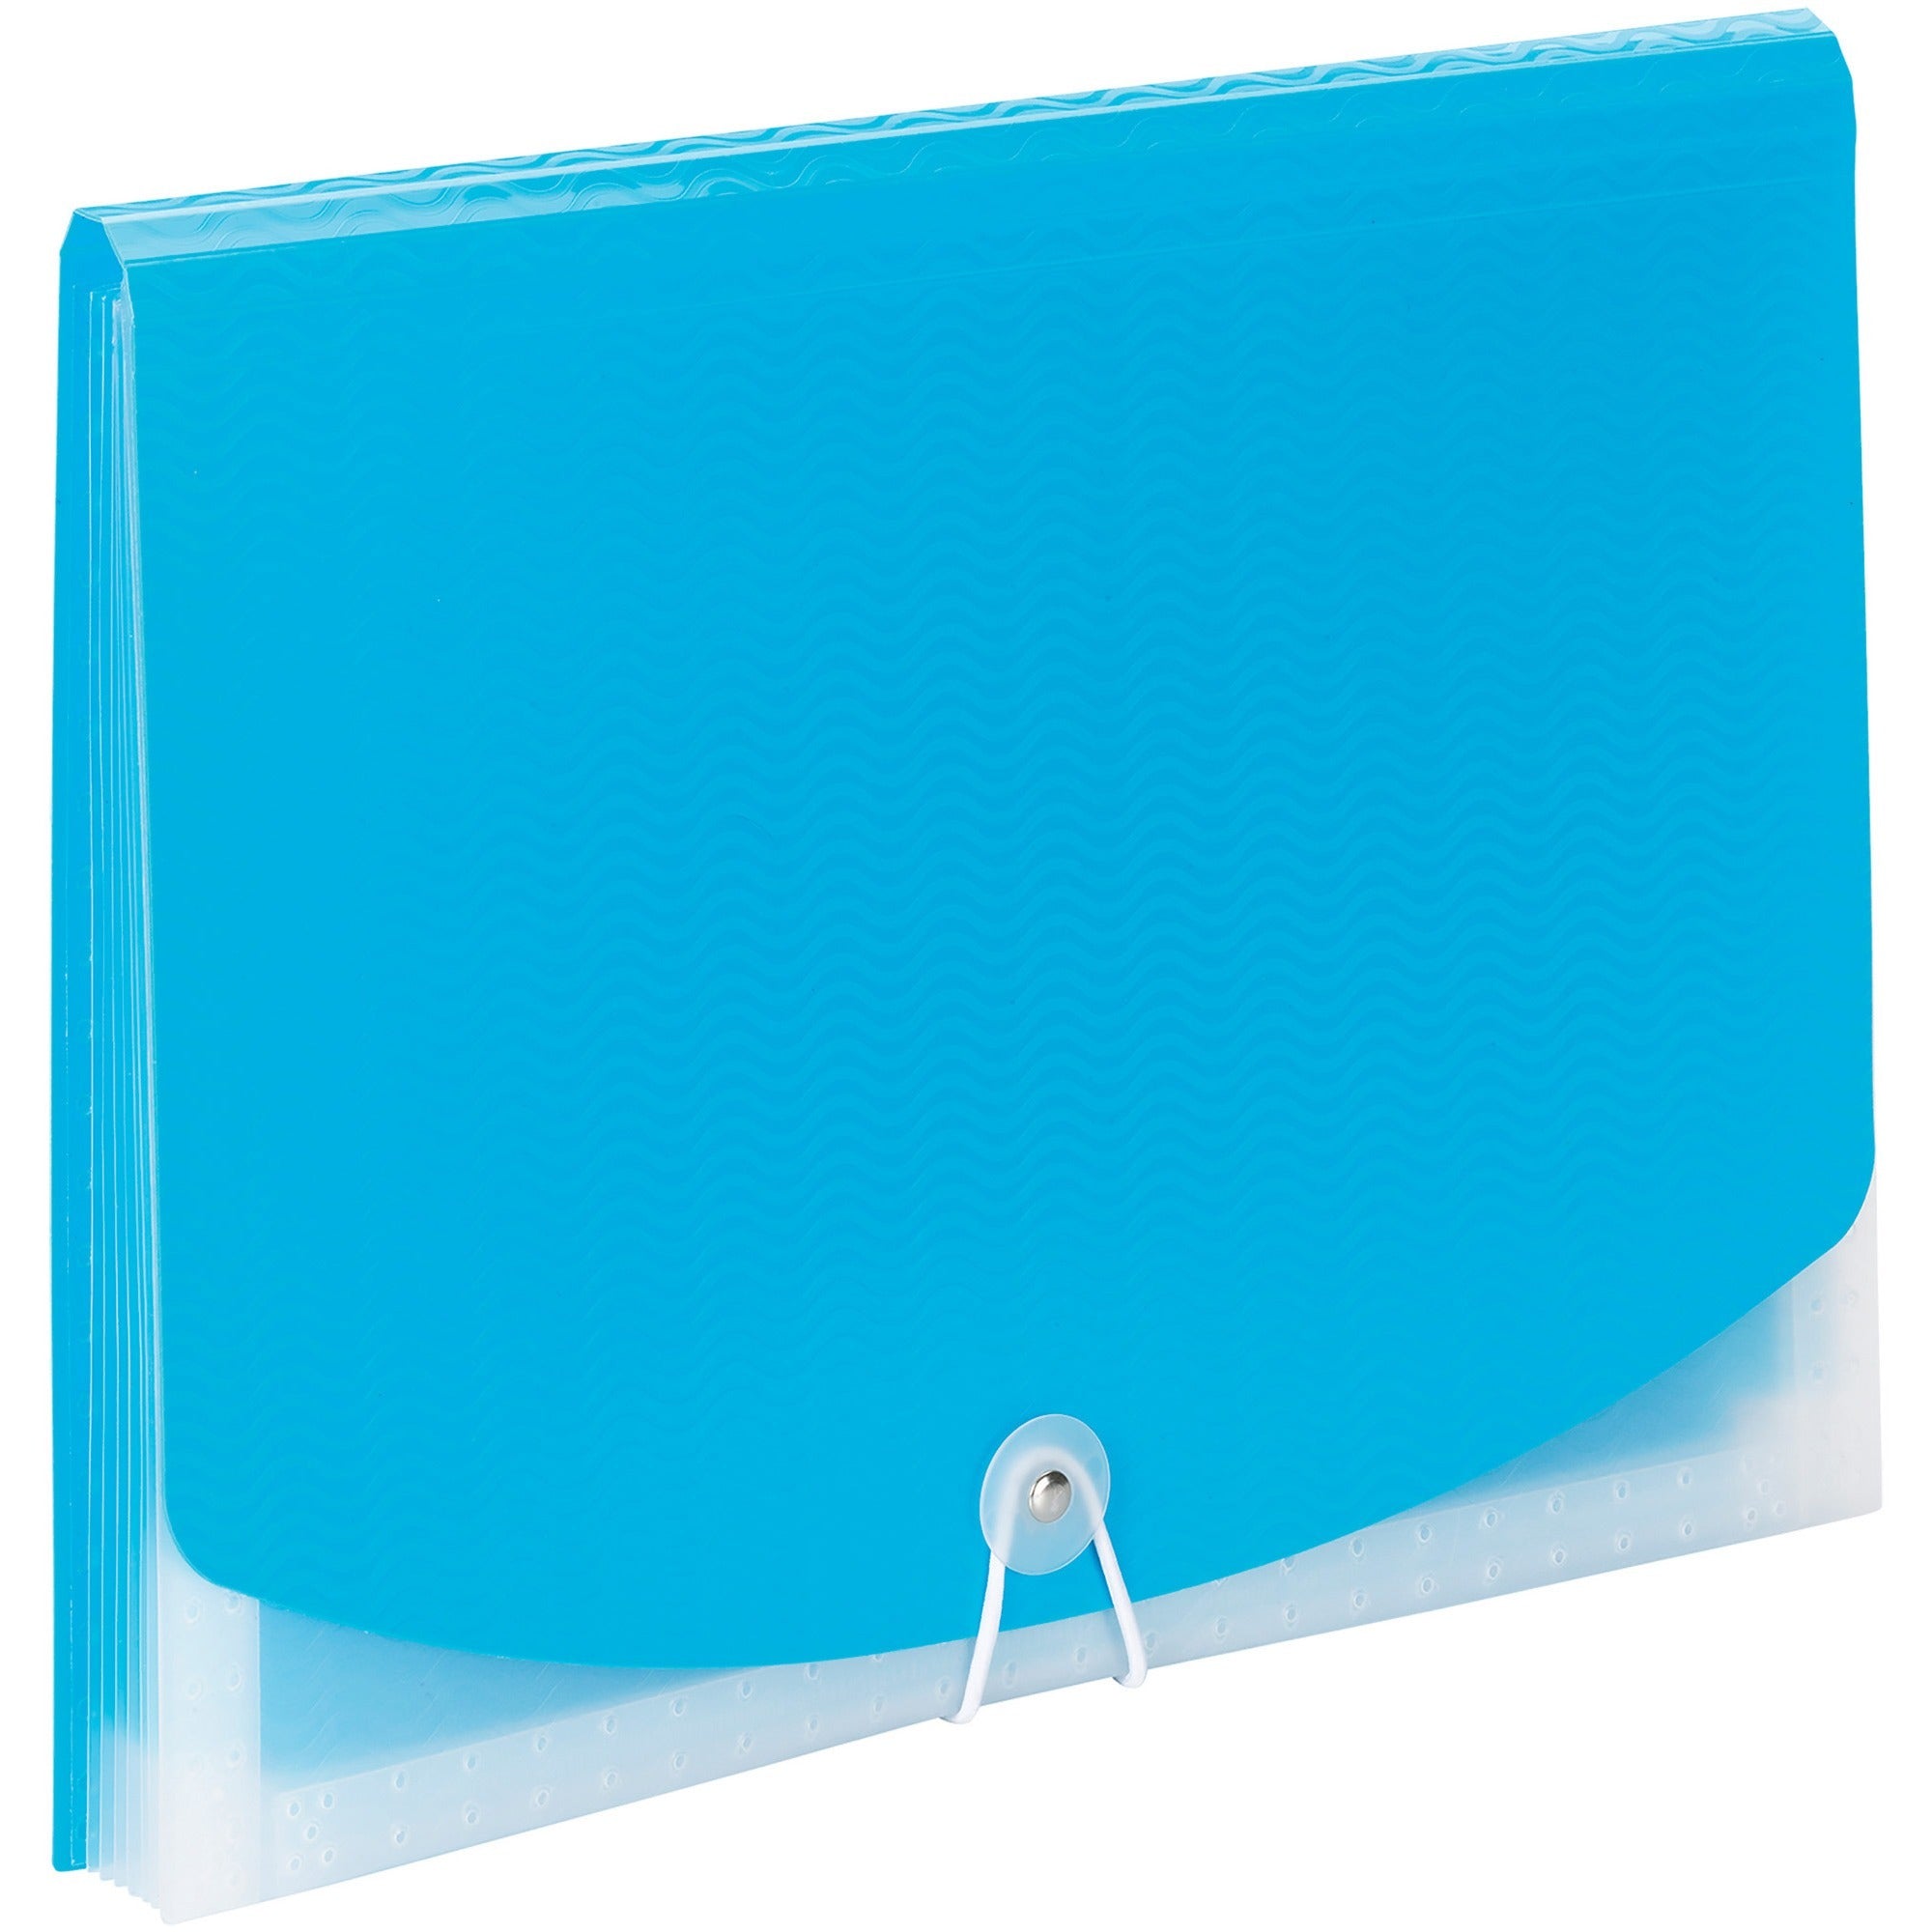 smead-letter-expanding-file-8-1-2-x-11-7-pockets-6-dividers-multi-colored-teal-clear-1-each_smd70873 - 1